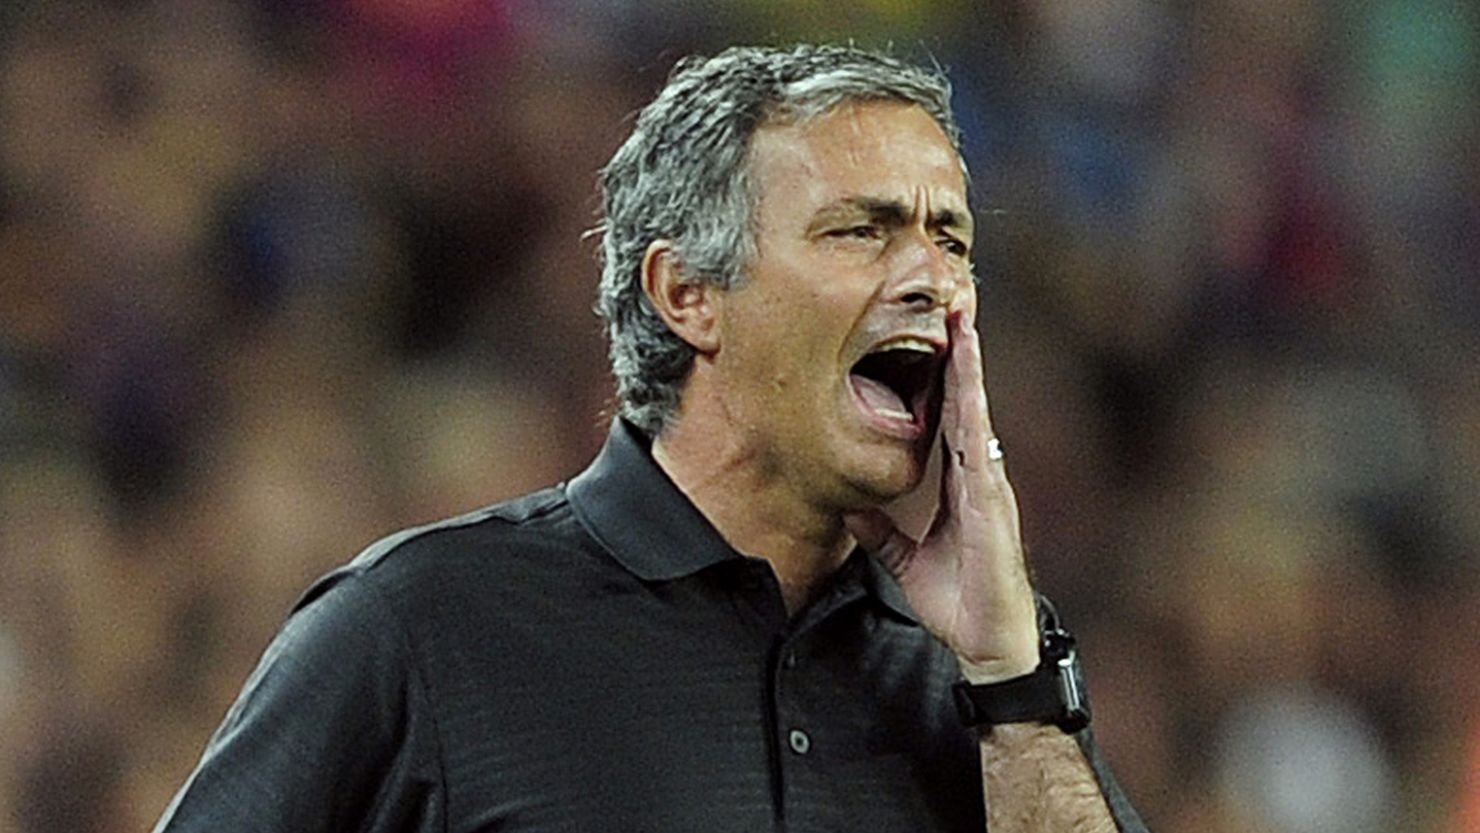 Real Madrid coach Jose Mourinho shouts during the second leg of the Spanish Super Cup at Barcelona's Camp Nou.